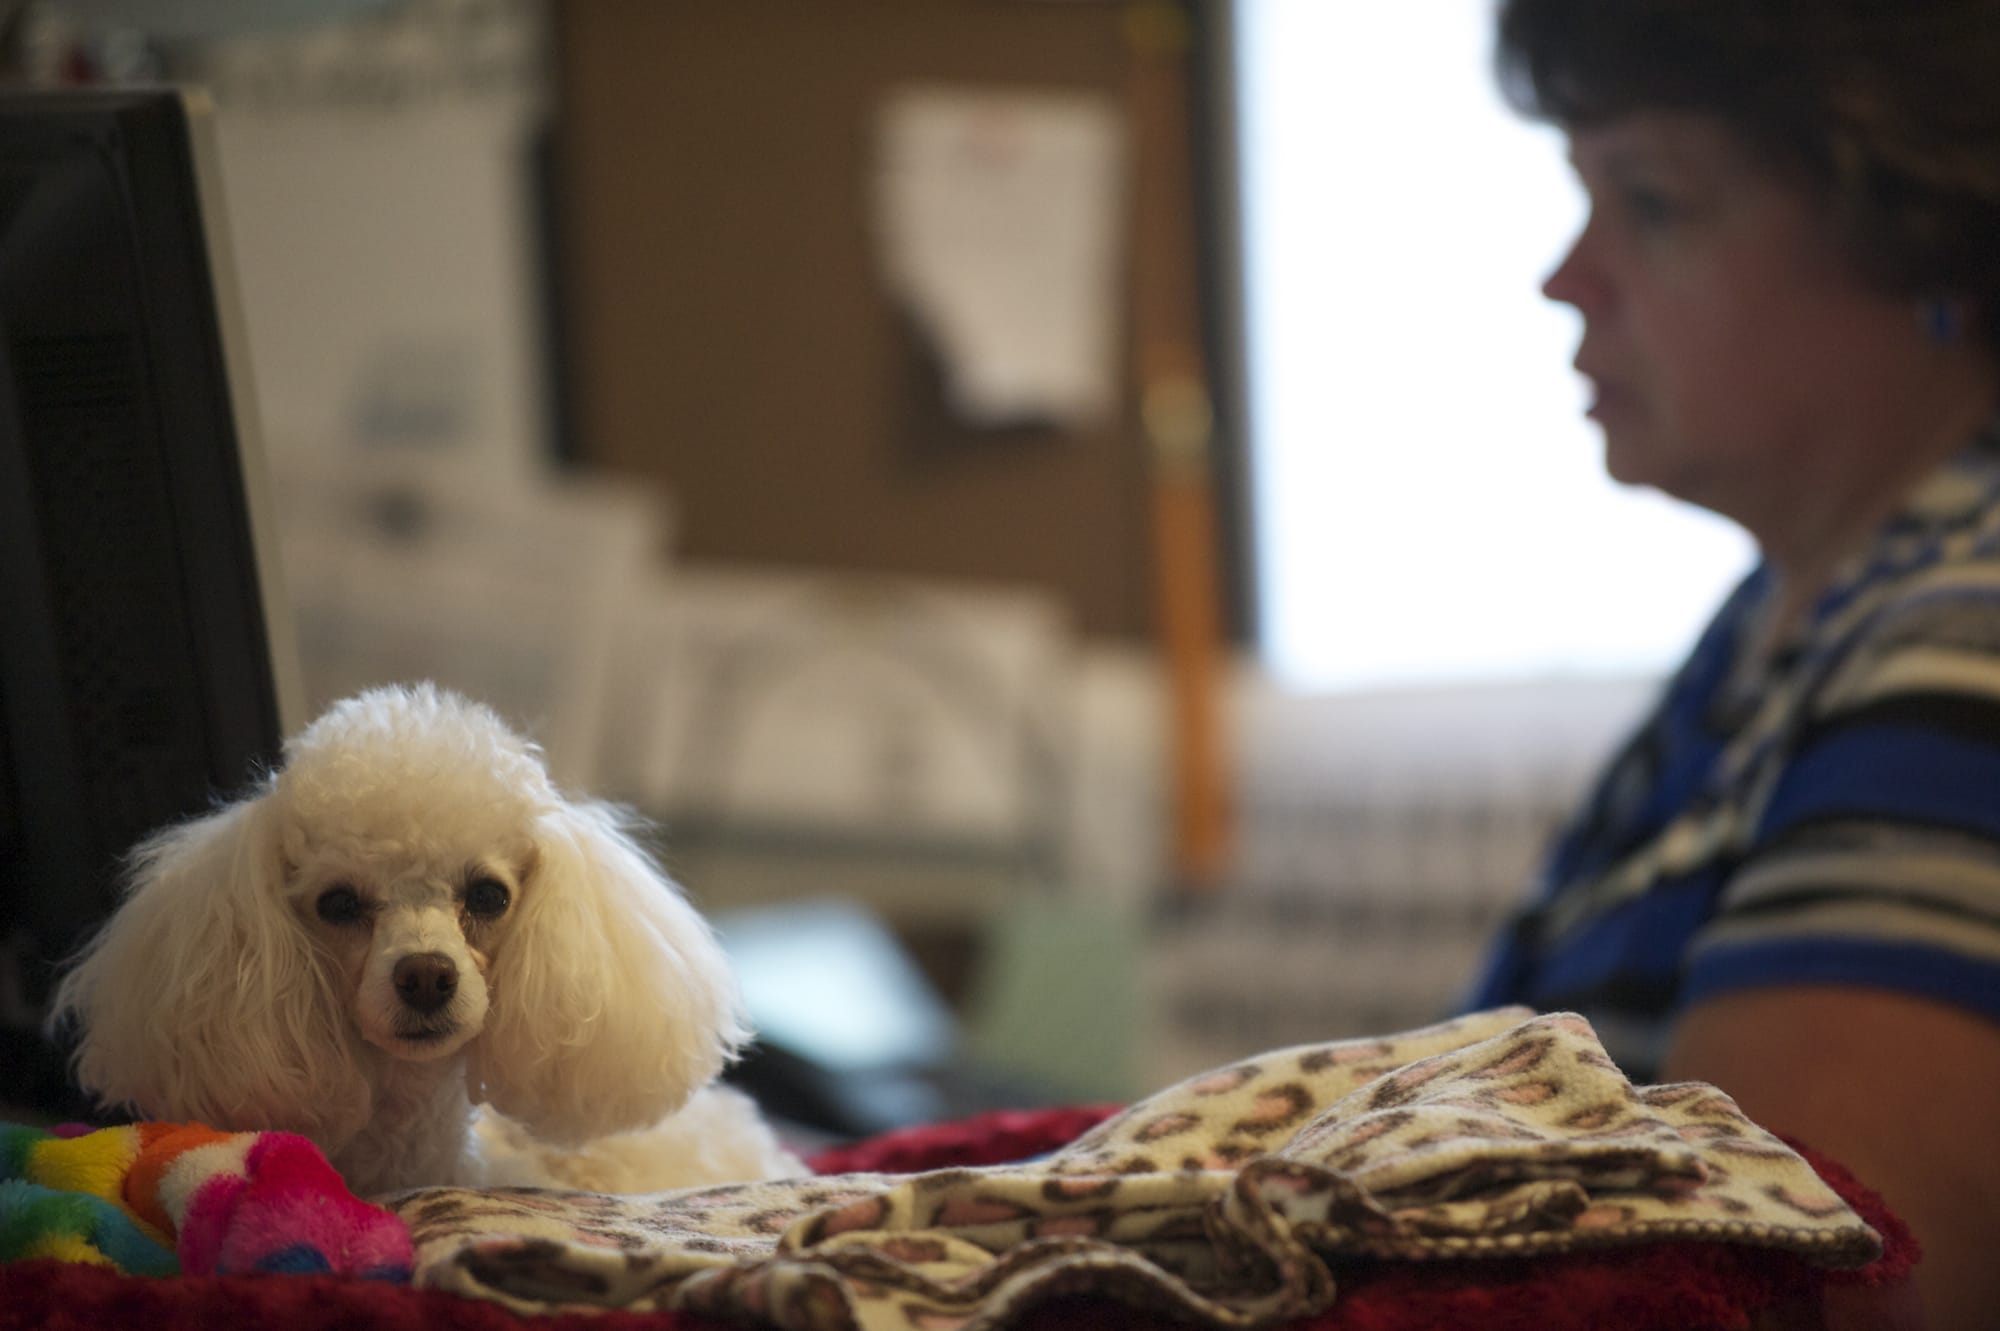 Tami Marshall works as a medical coder from home with her dog Jazzy to keep her company on Wednesday June 11, 2014.